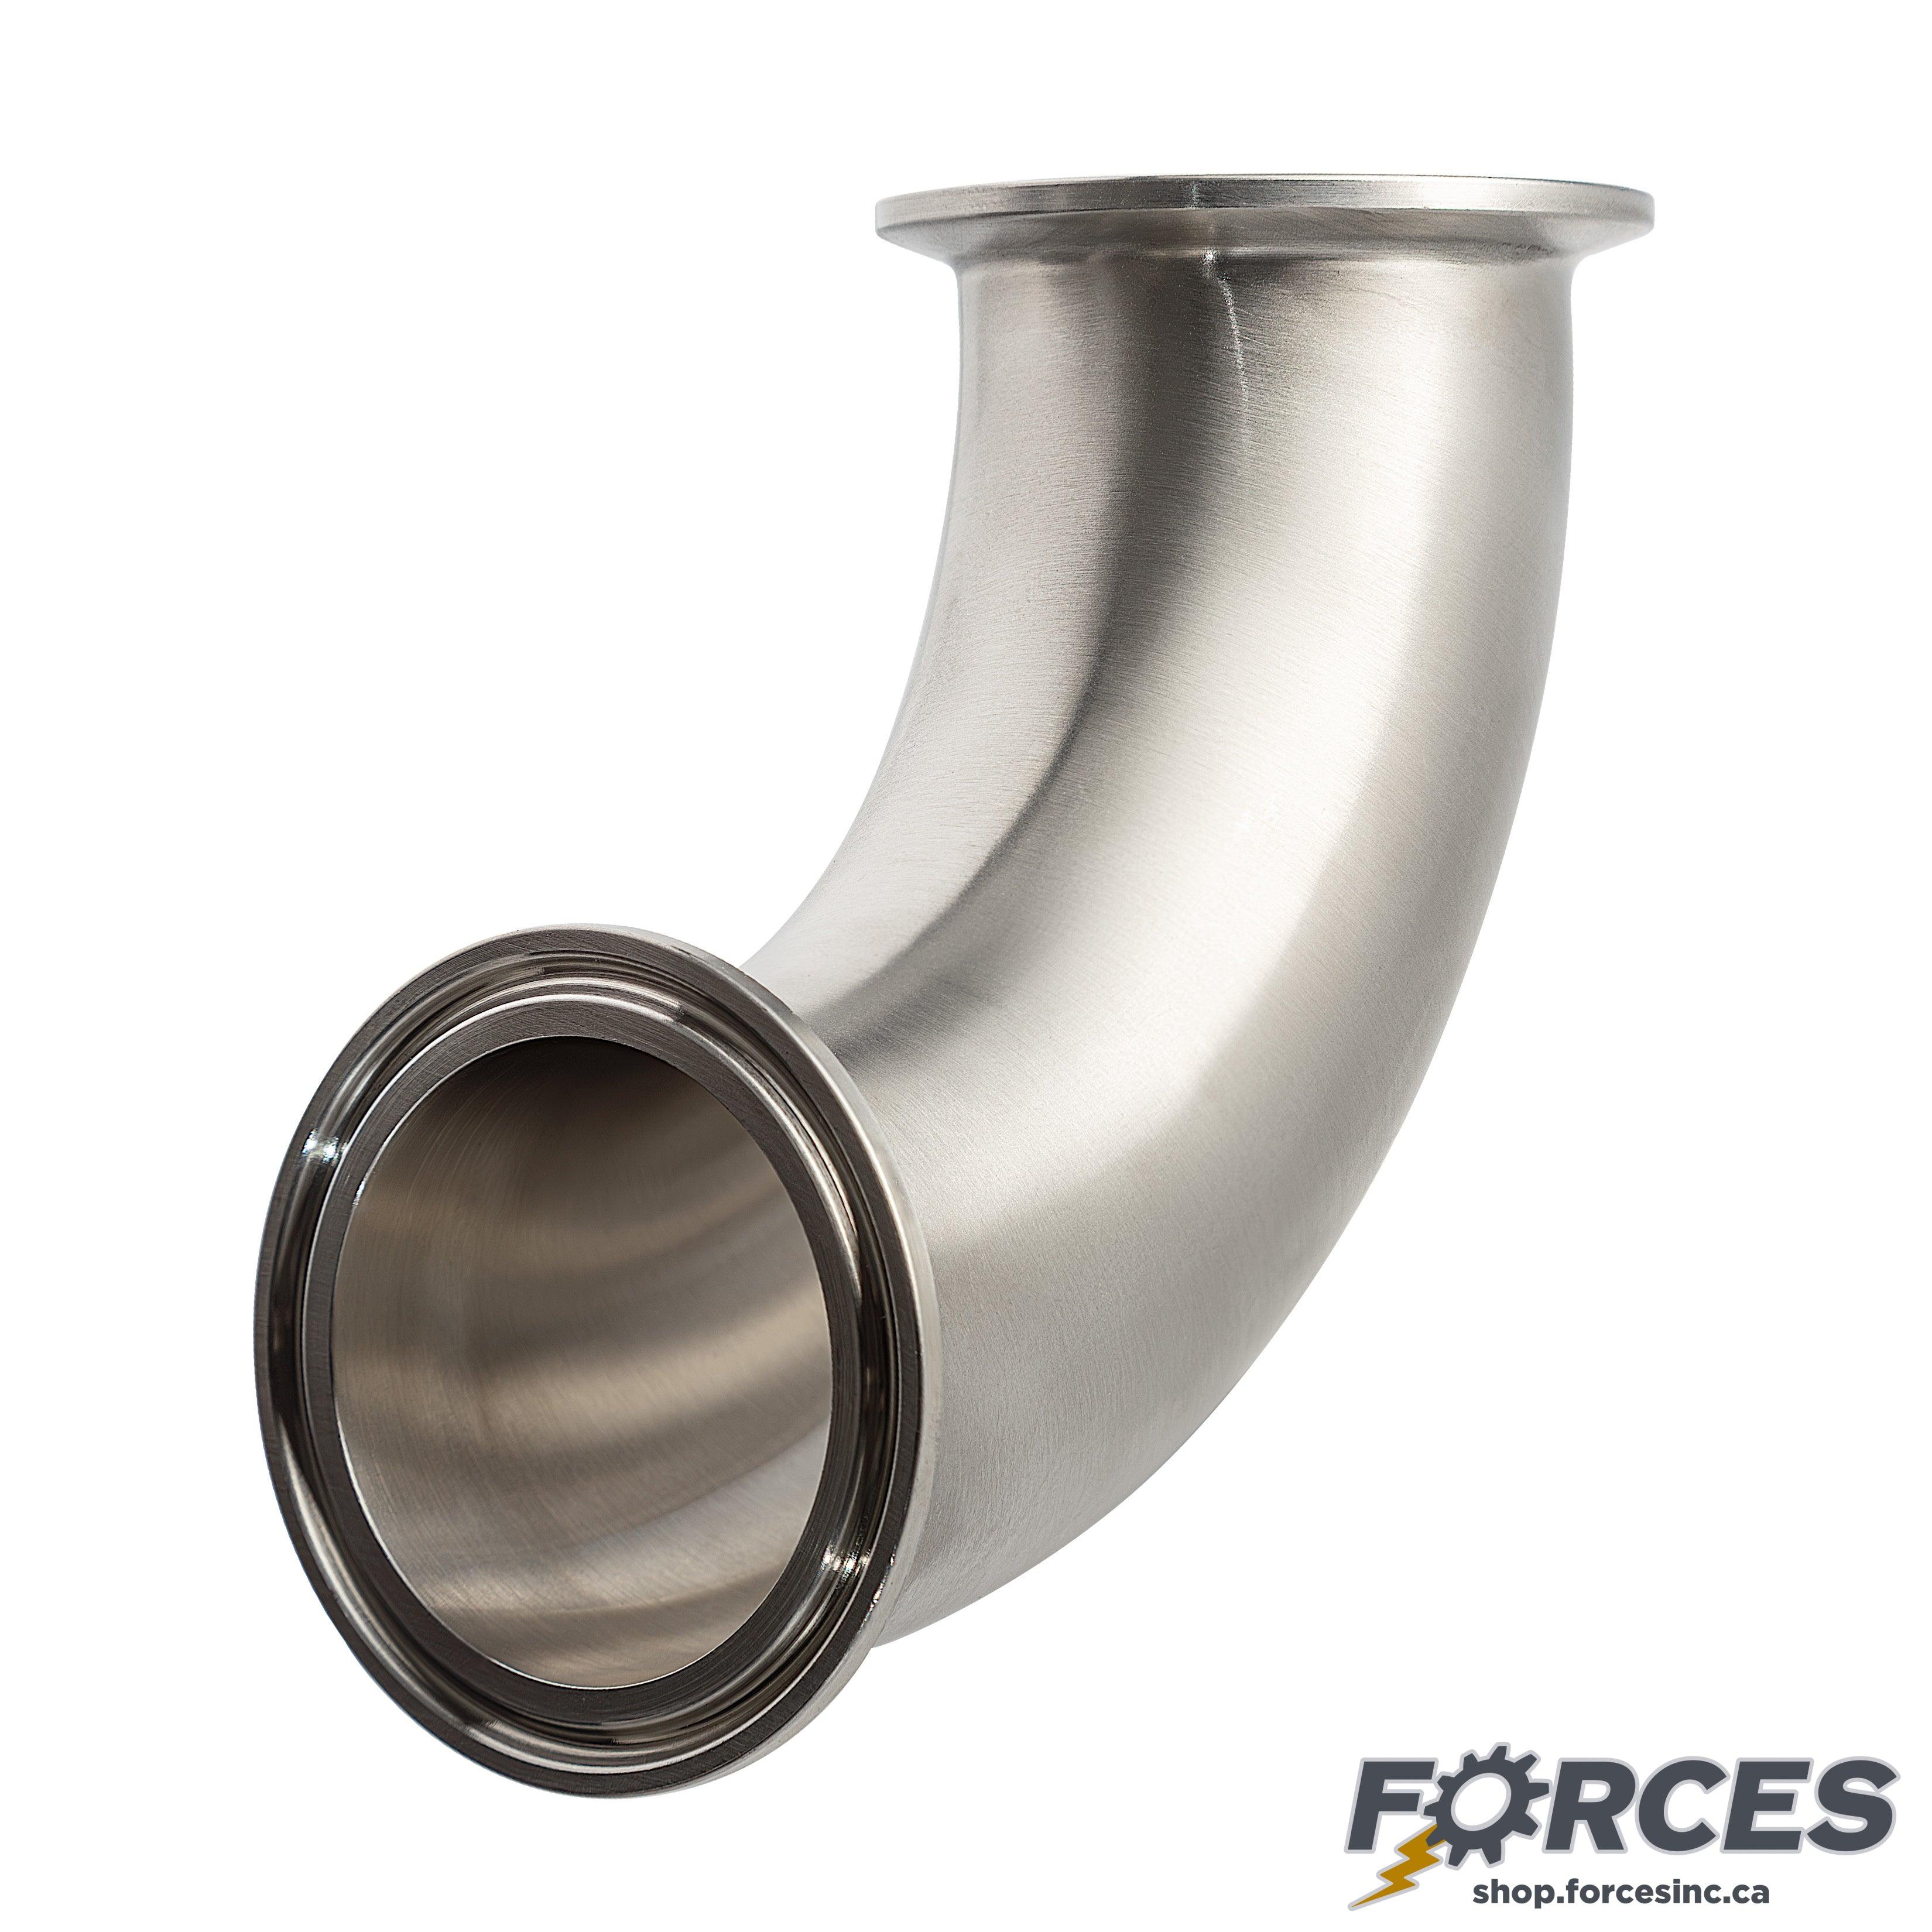 2-1/2" Tri-Clamp 90° Elbow - Stainless Steel 316 - Forces Inc